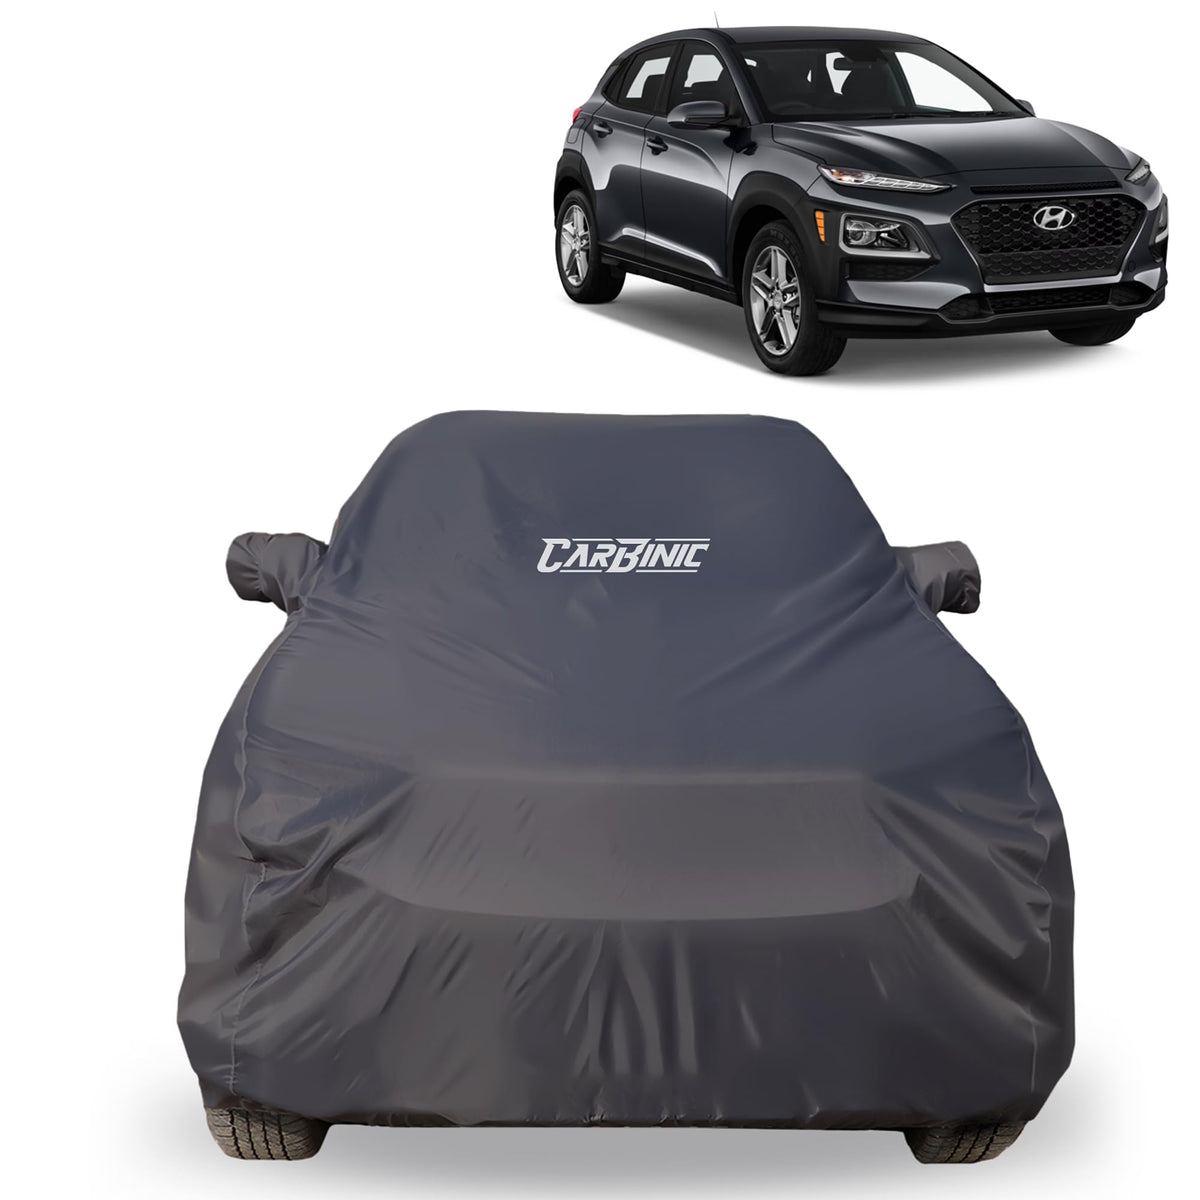 CARBINIC Car Body Cover for Hyundai Kona 2020 | Water Resistant, UV Protection Car Cover | Scratchproof Body Shield | Dustproof All-Weather Cover | Mirror Pocket & Antenna | Car Accessories, Grey